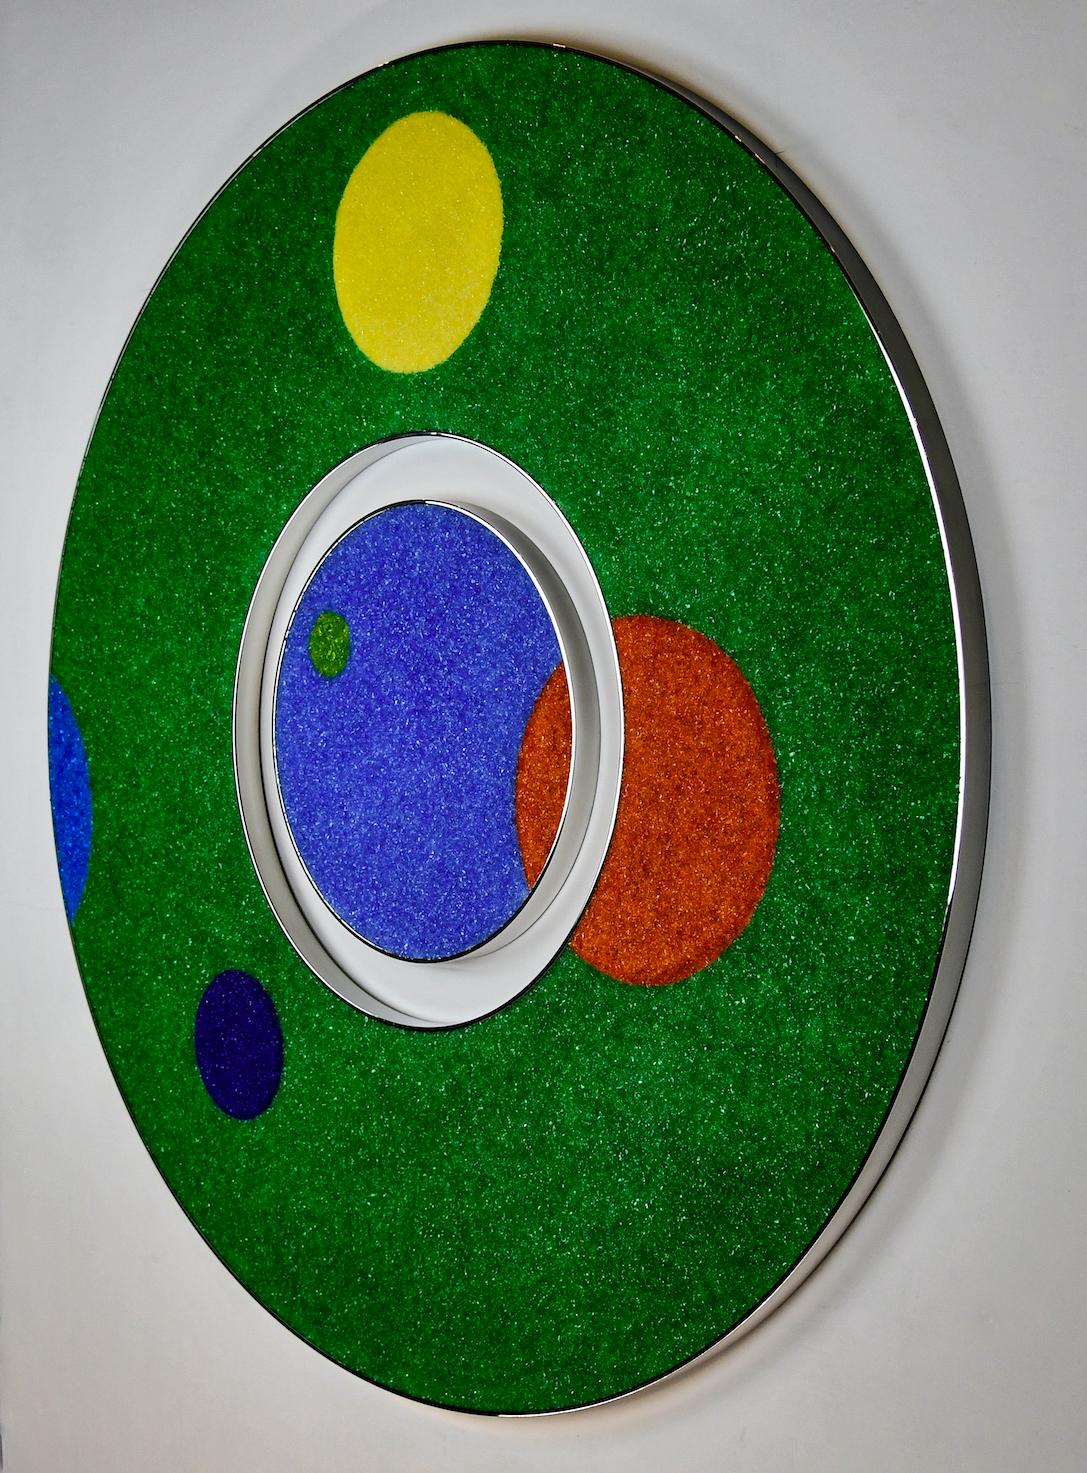 “Still In Play” is a one-of-a-kind two-piece wall sculpture. The outer circle is made with fragmented Murano glass and acrylic over a base of reclaimed wood framed by two thin bands of stainless steel polished to a mirror finish. The inner circle